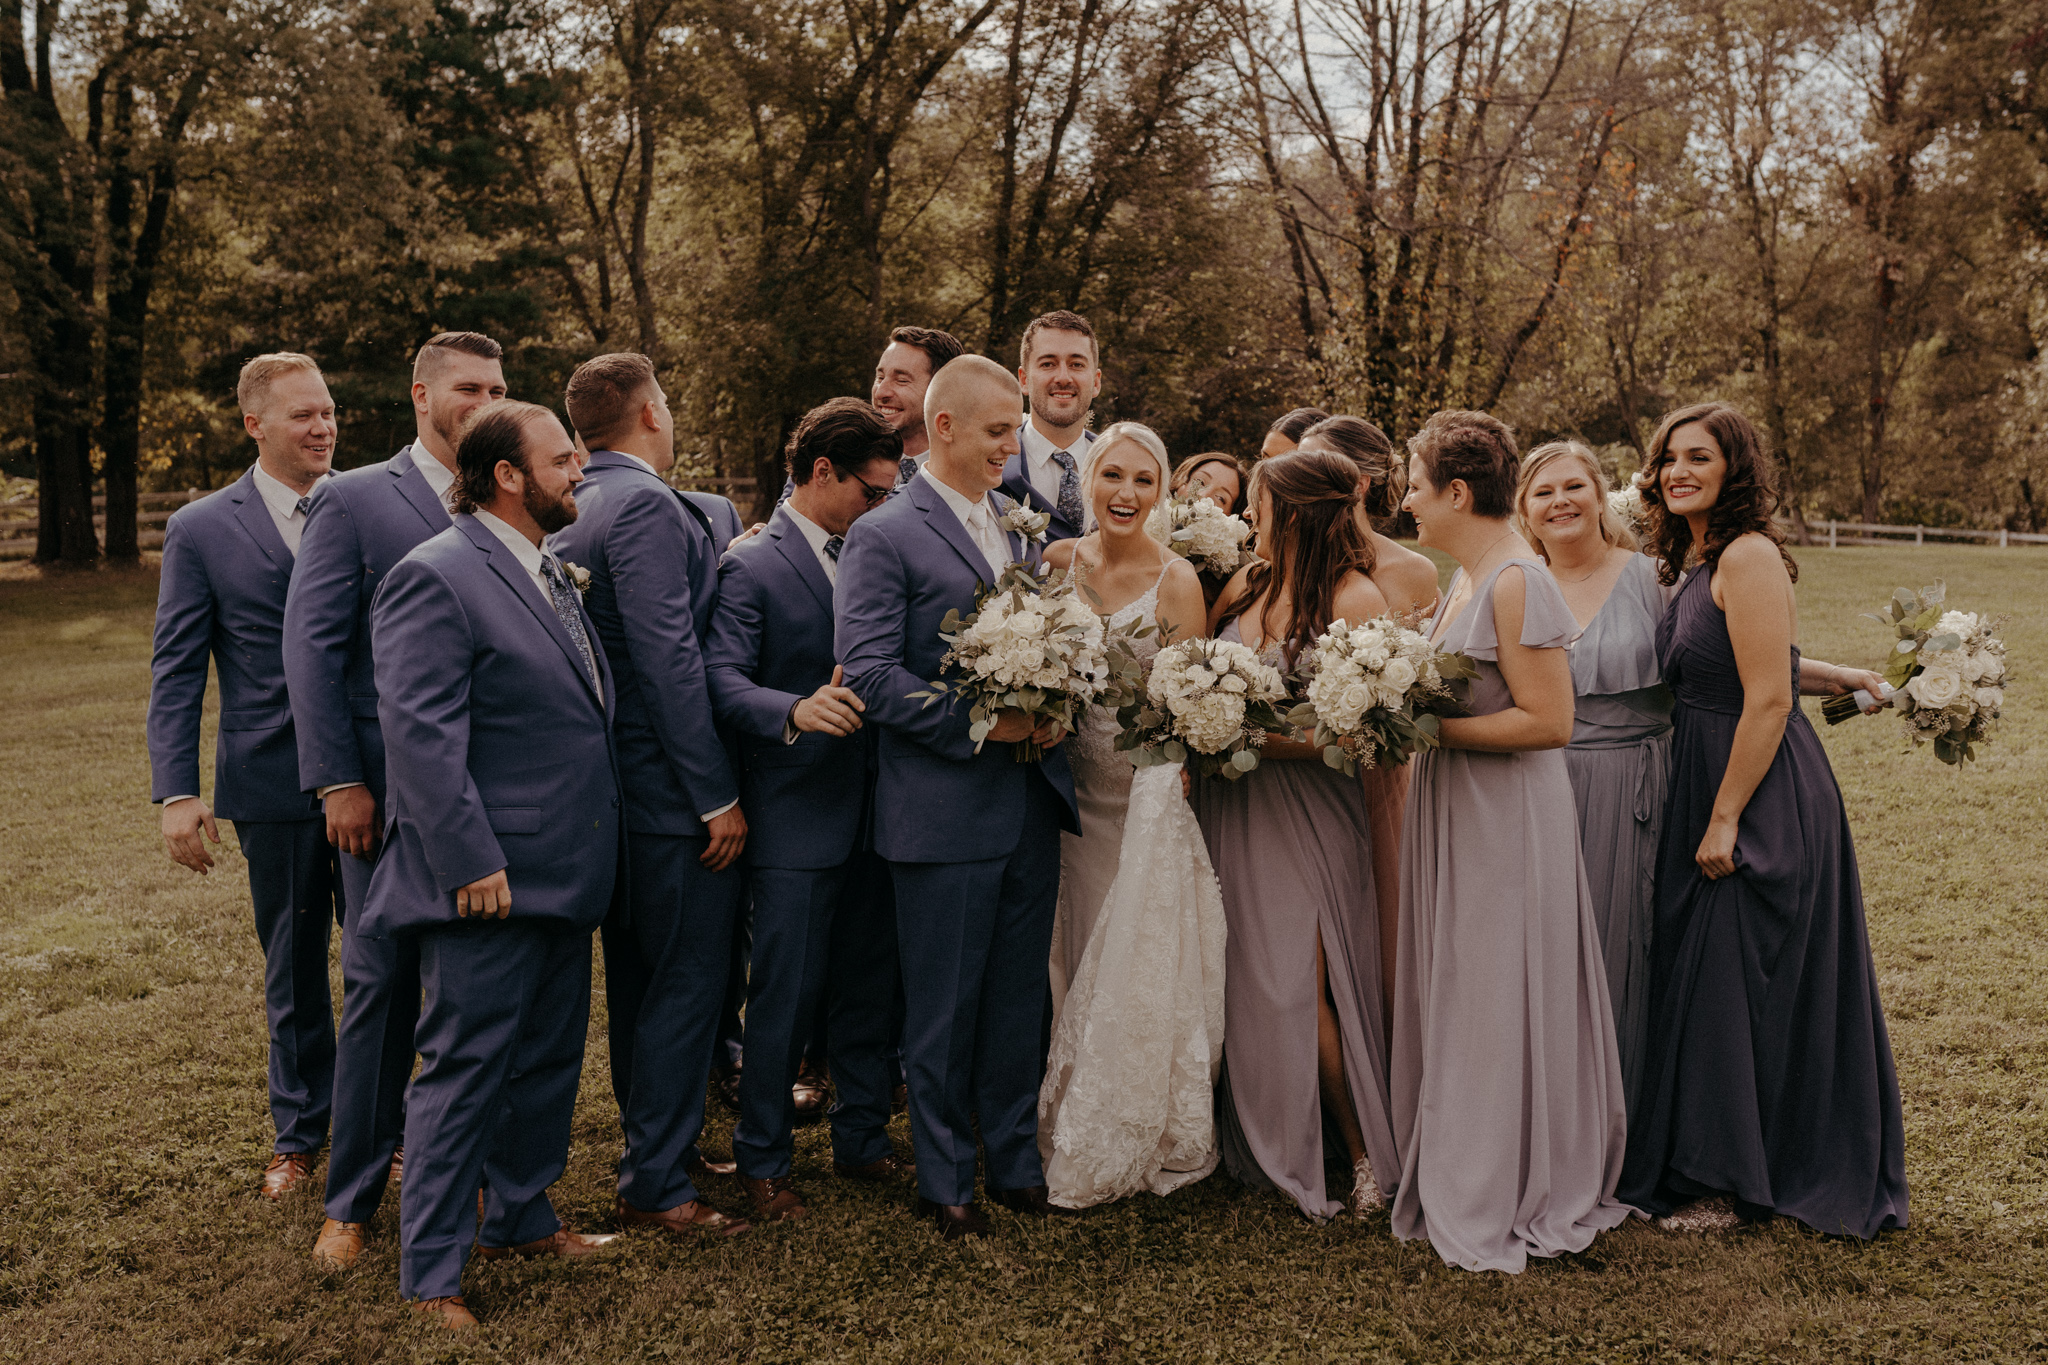 Outdoor Relaxed Wedding Photographer in Maryland for Moody Organic Photos